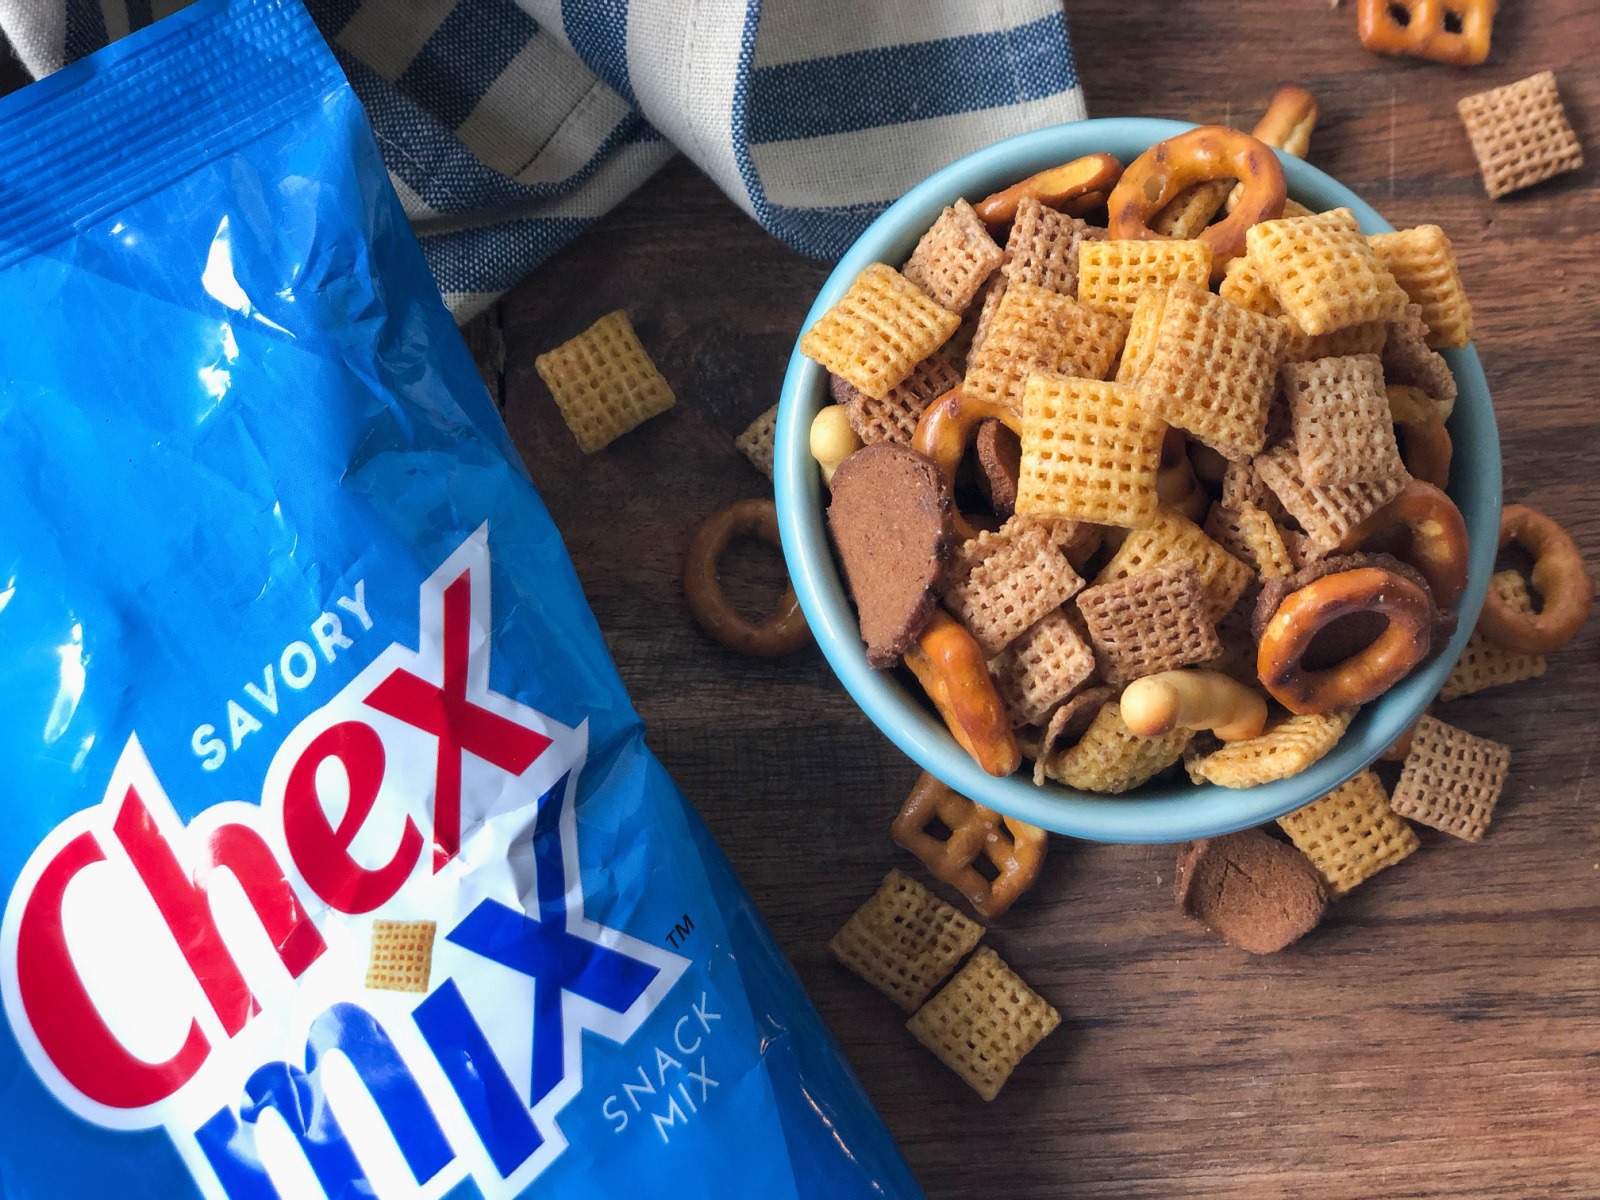 Get Chex Mix For As Little As $1.65 Per Bag At Publix